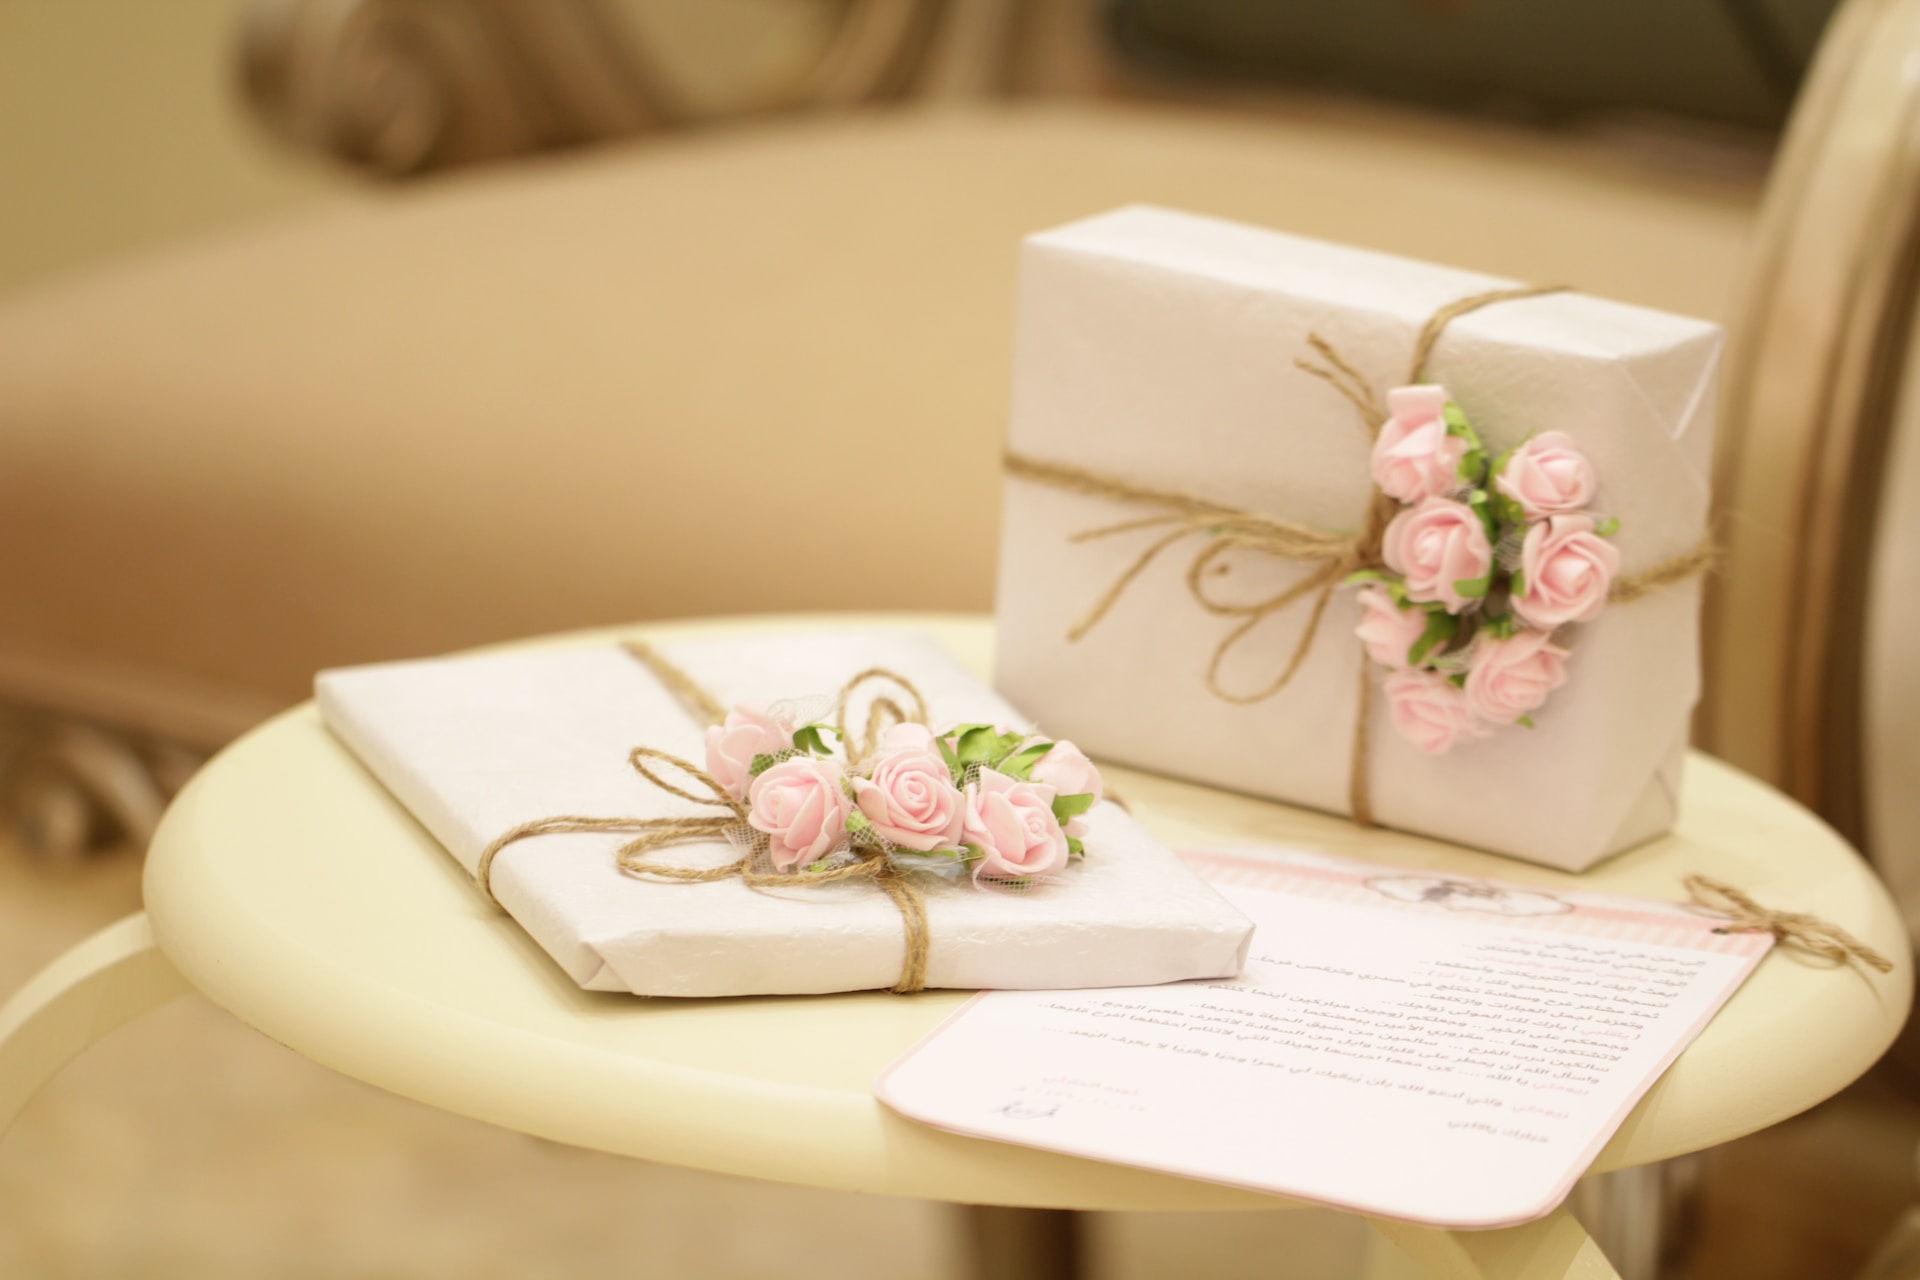 Top Wedding Gift Ideas When You Just Don’t Have a Clue